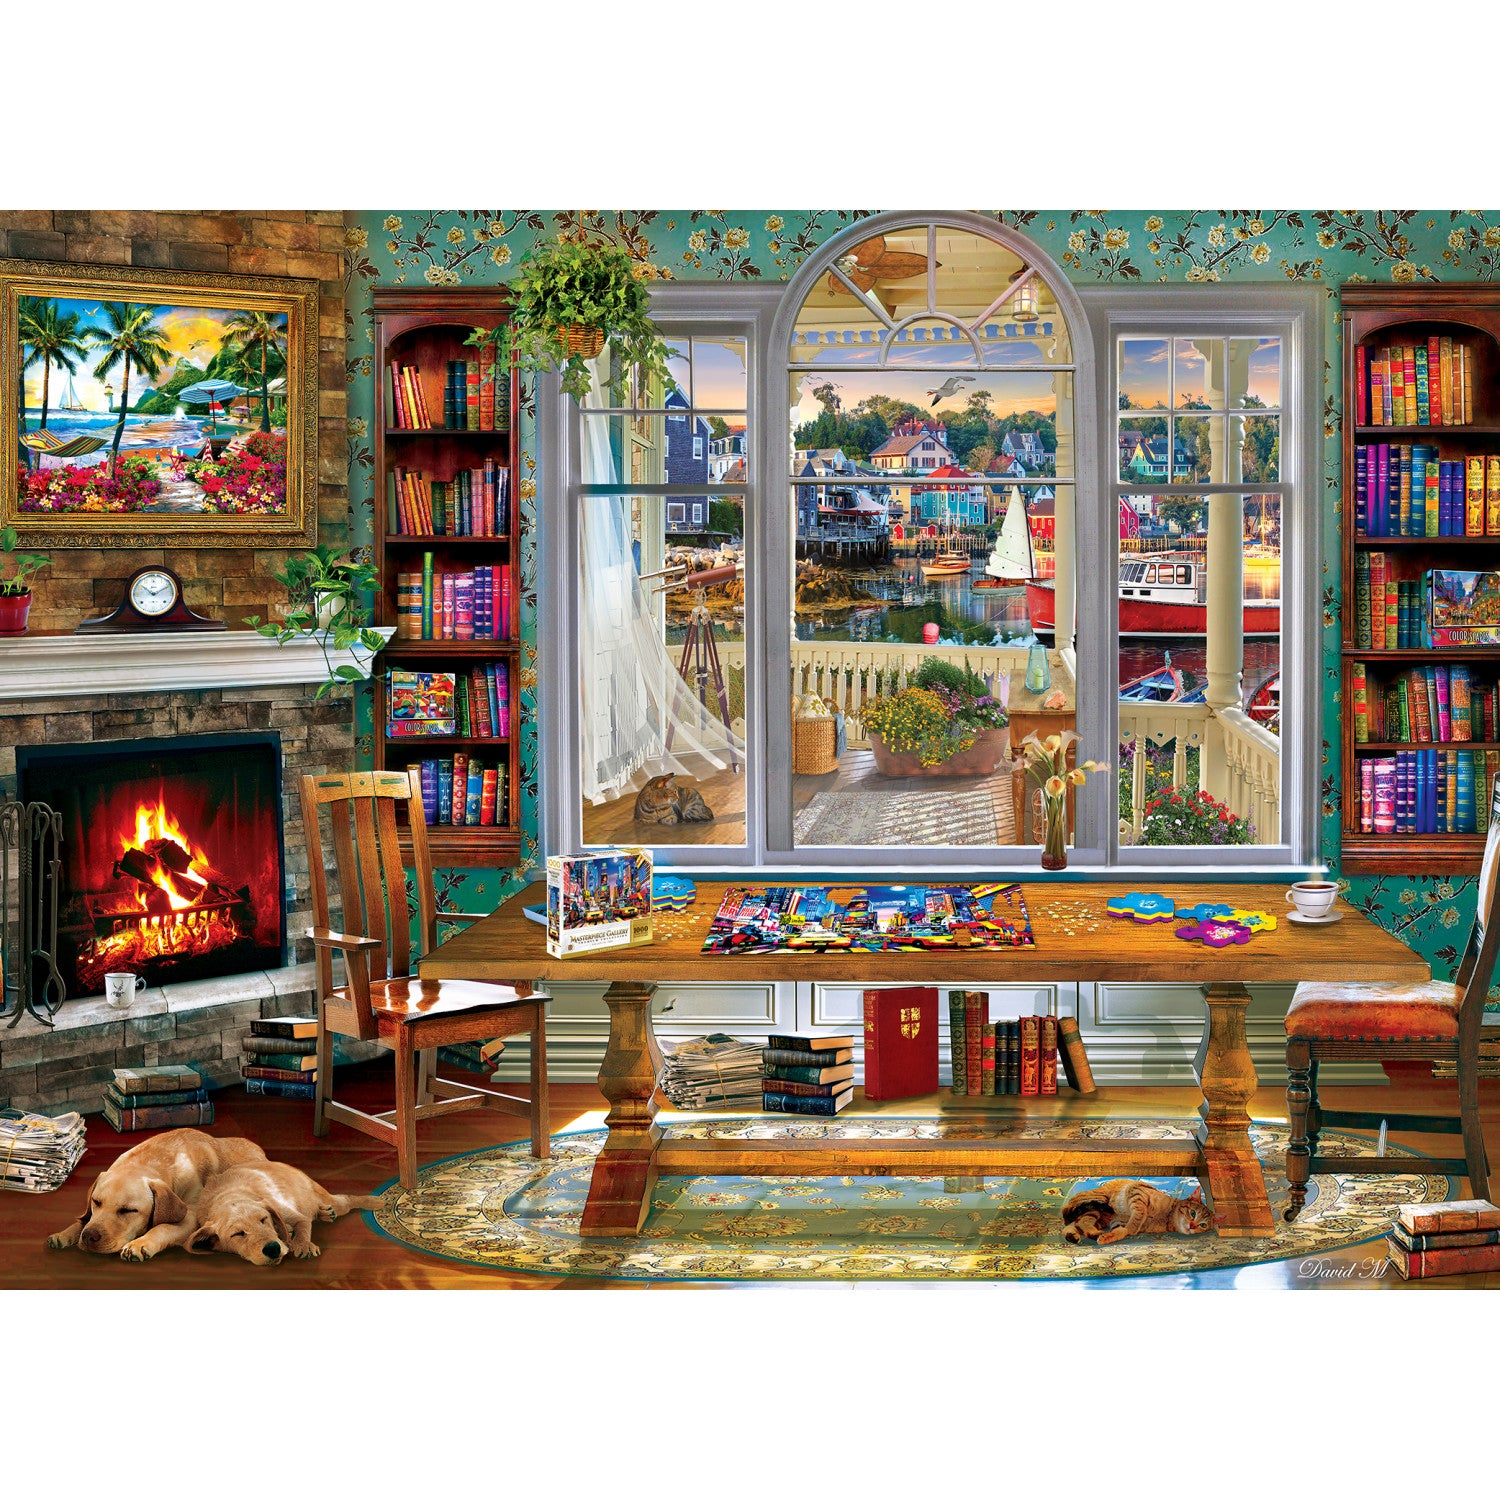 MasterPiece Gallery - A Puzzling Afternoon 1000 Piece Puzzle